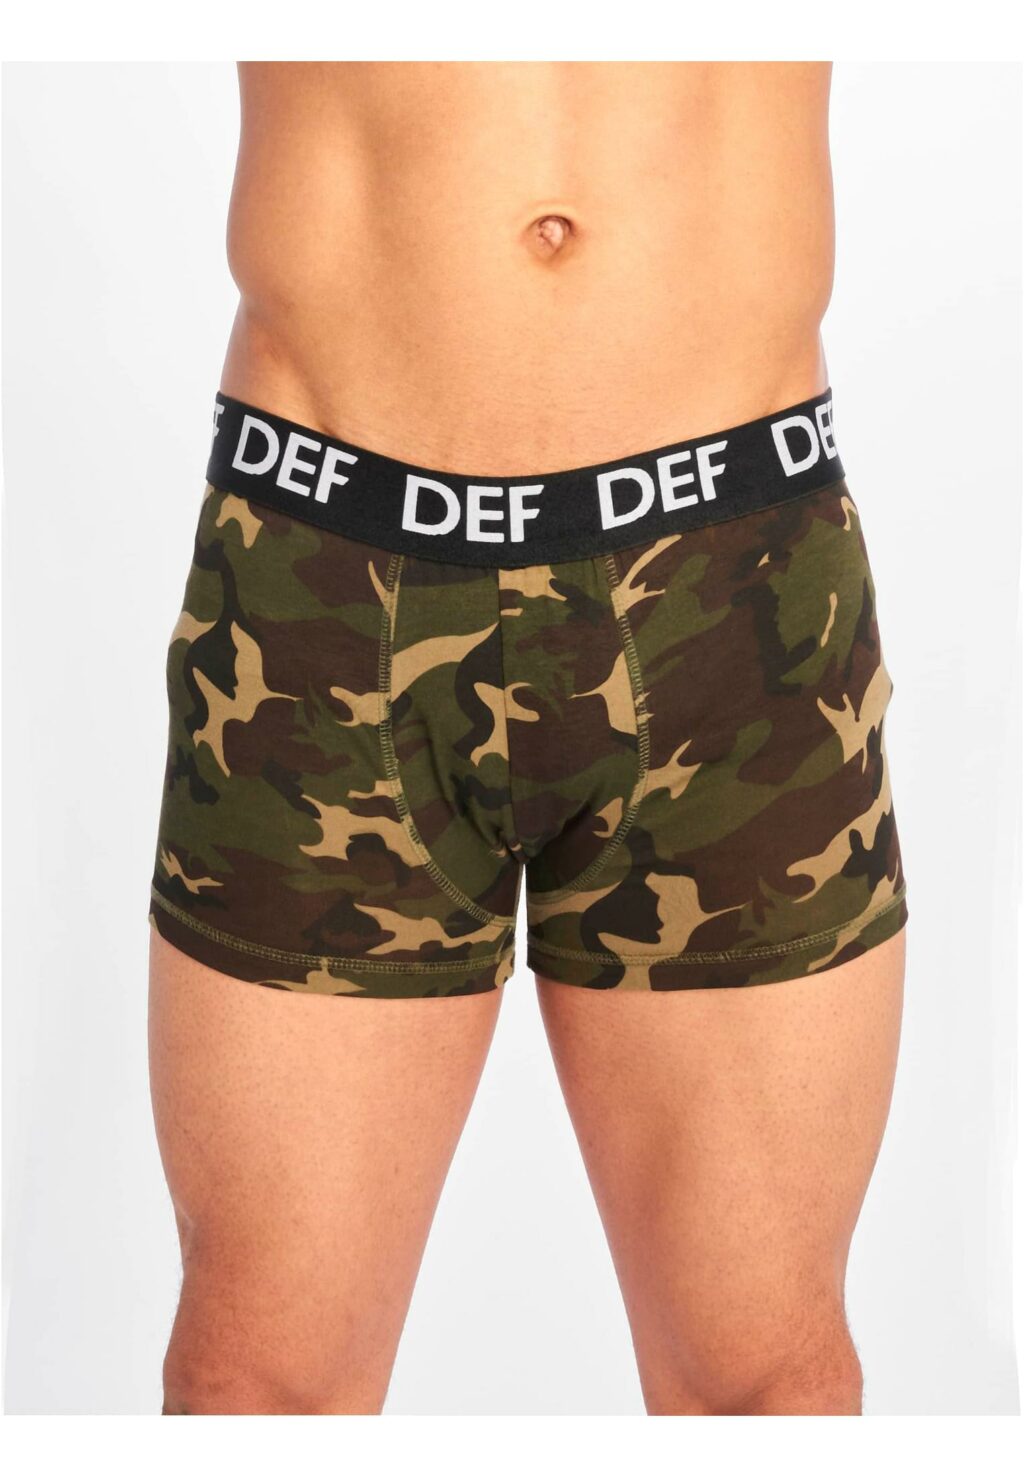 DEF Dong Boxershorts green camouflage DFBX006